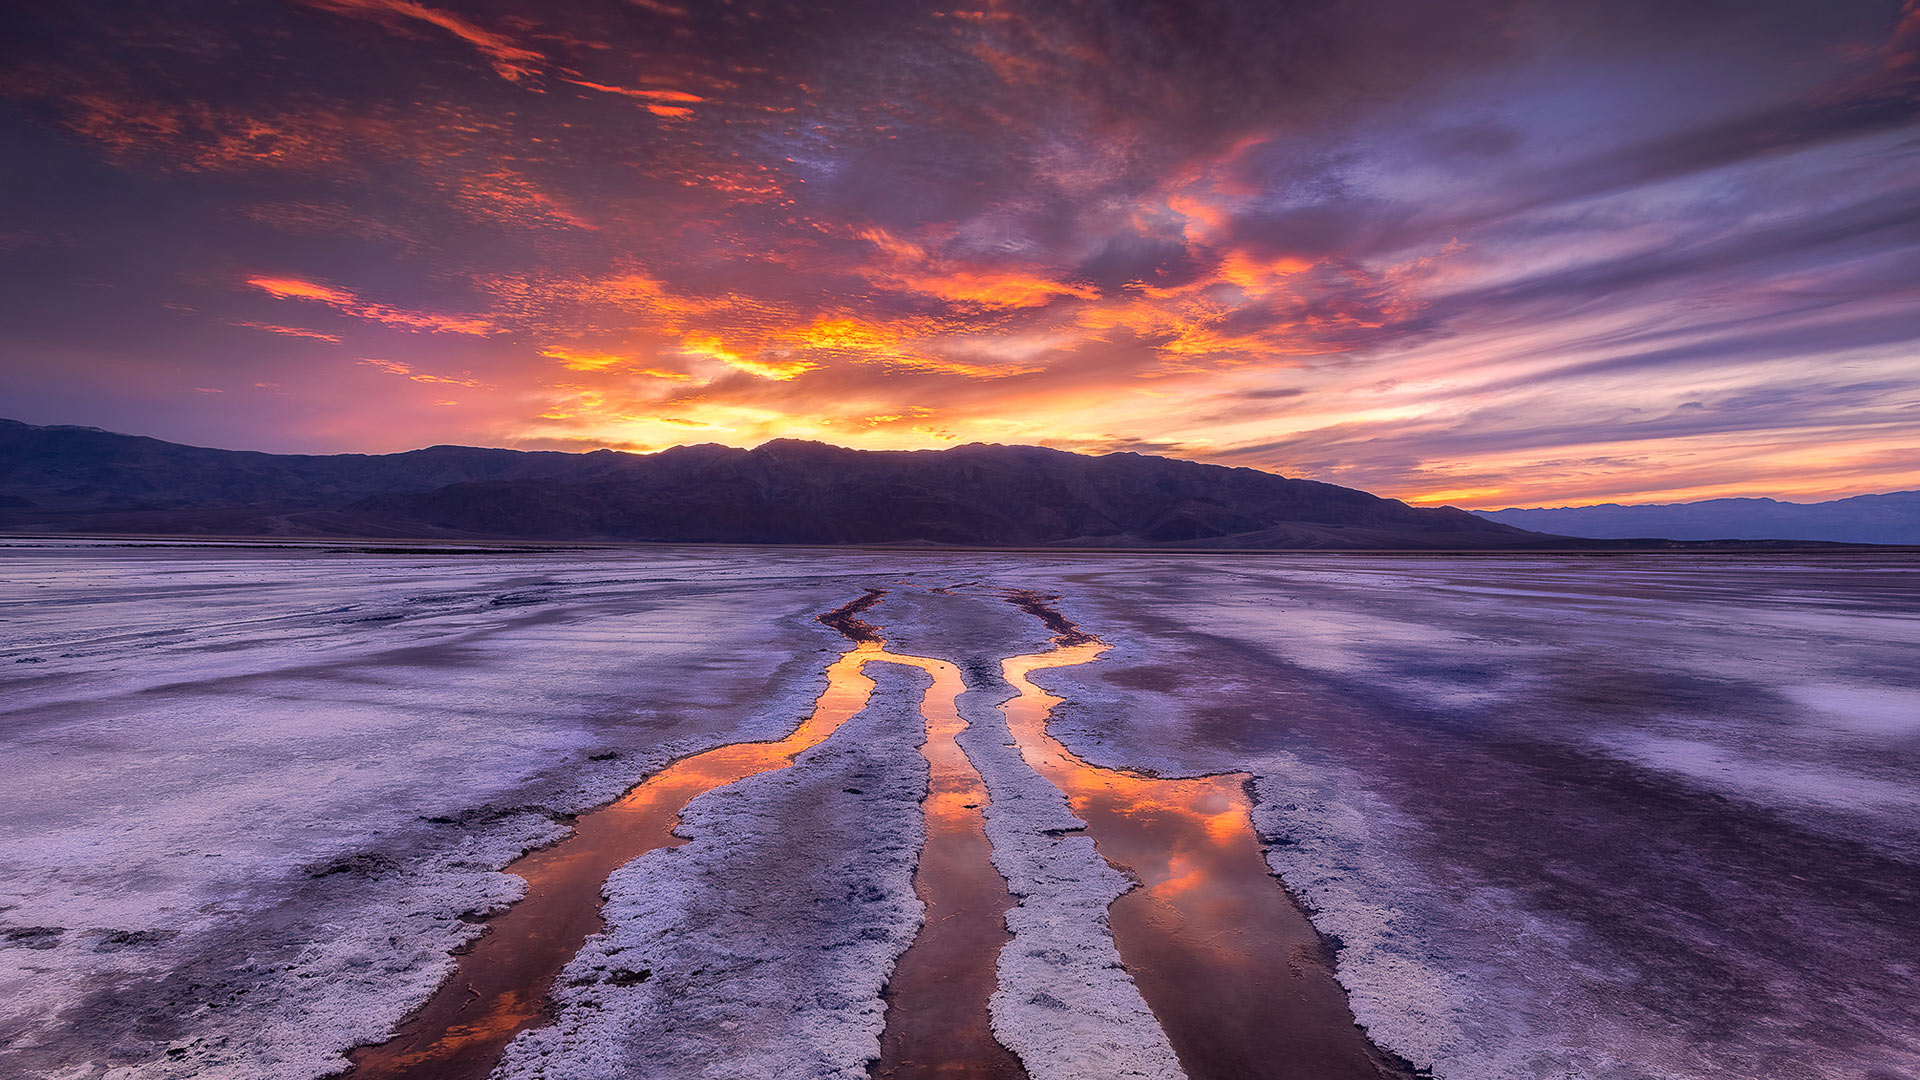 Nature Landscape Sky Clouds Mountains Sunset Death Valley California USA Water Reflection 1920x1080